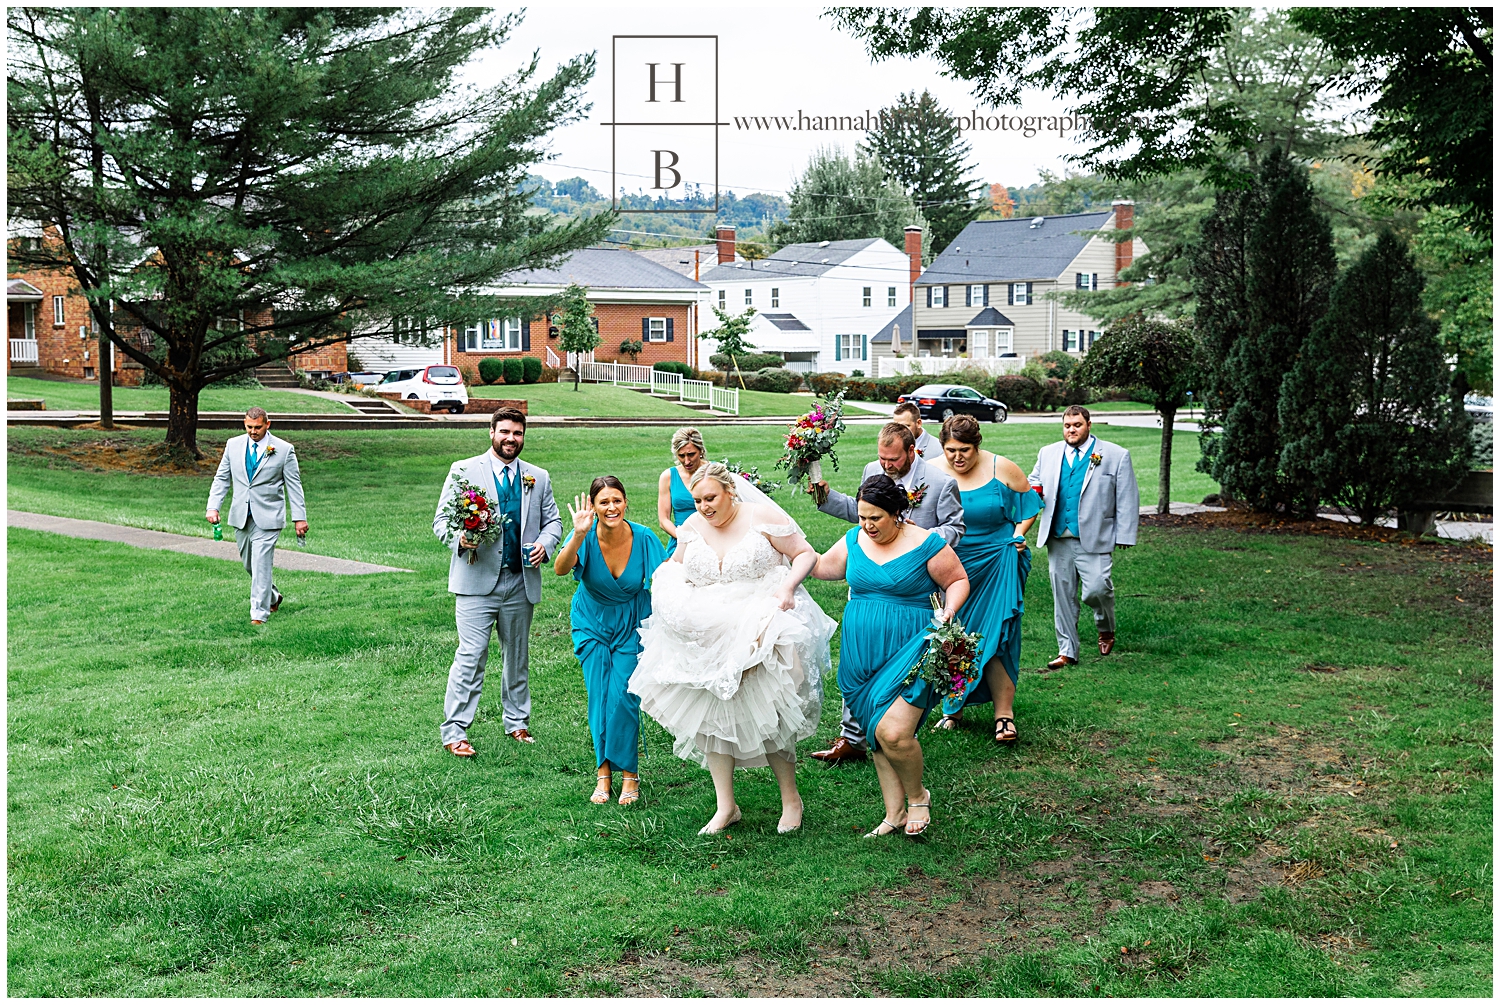 Bride Holding Up Dress Walking through wet grass with bridal party